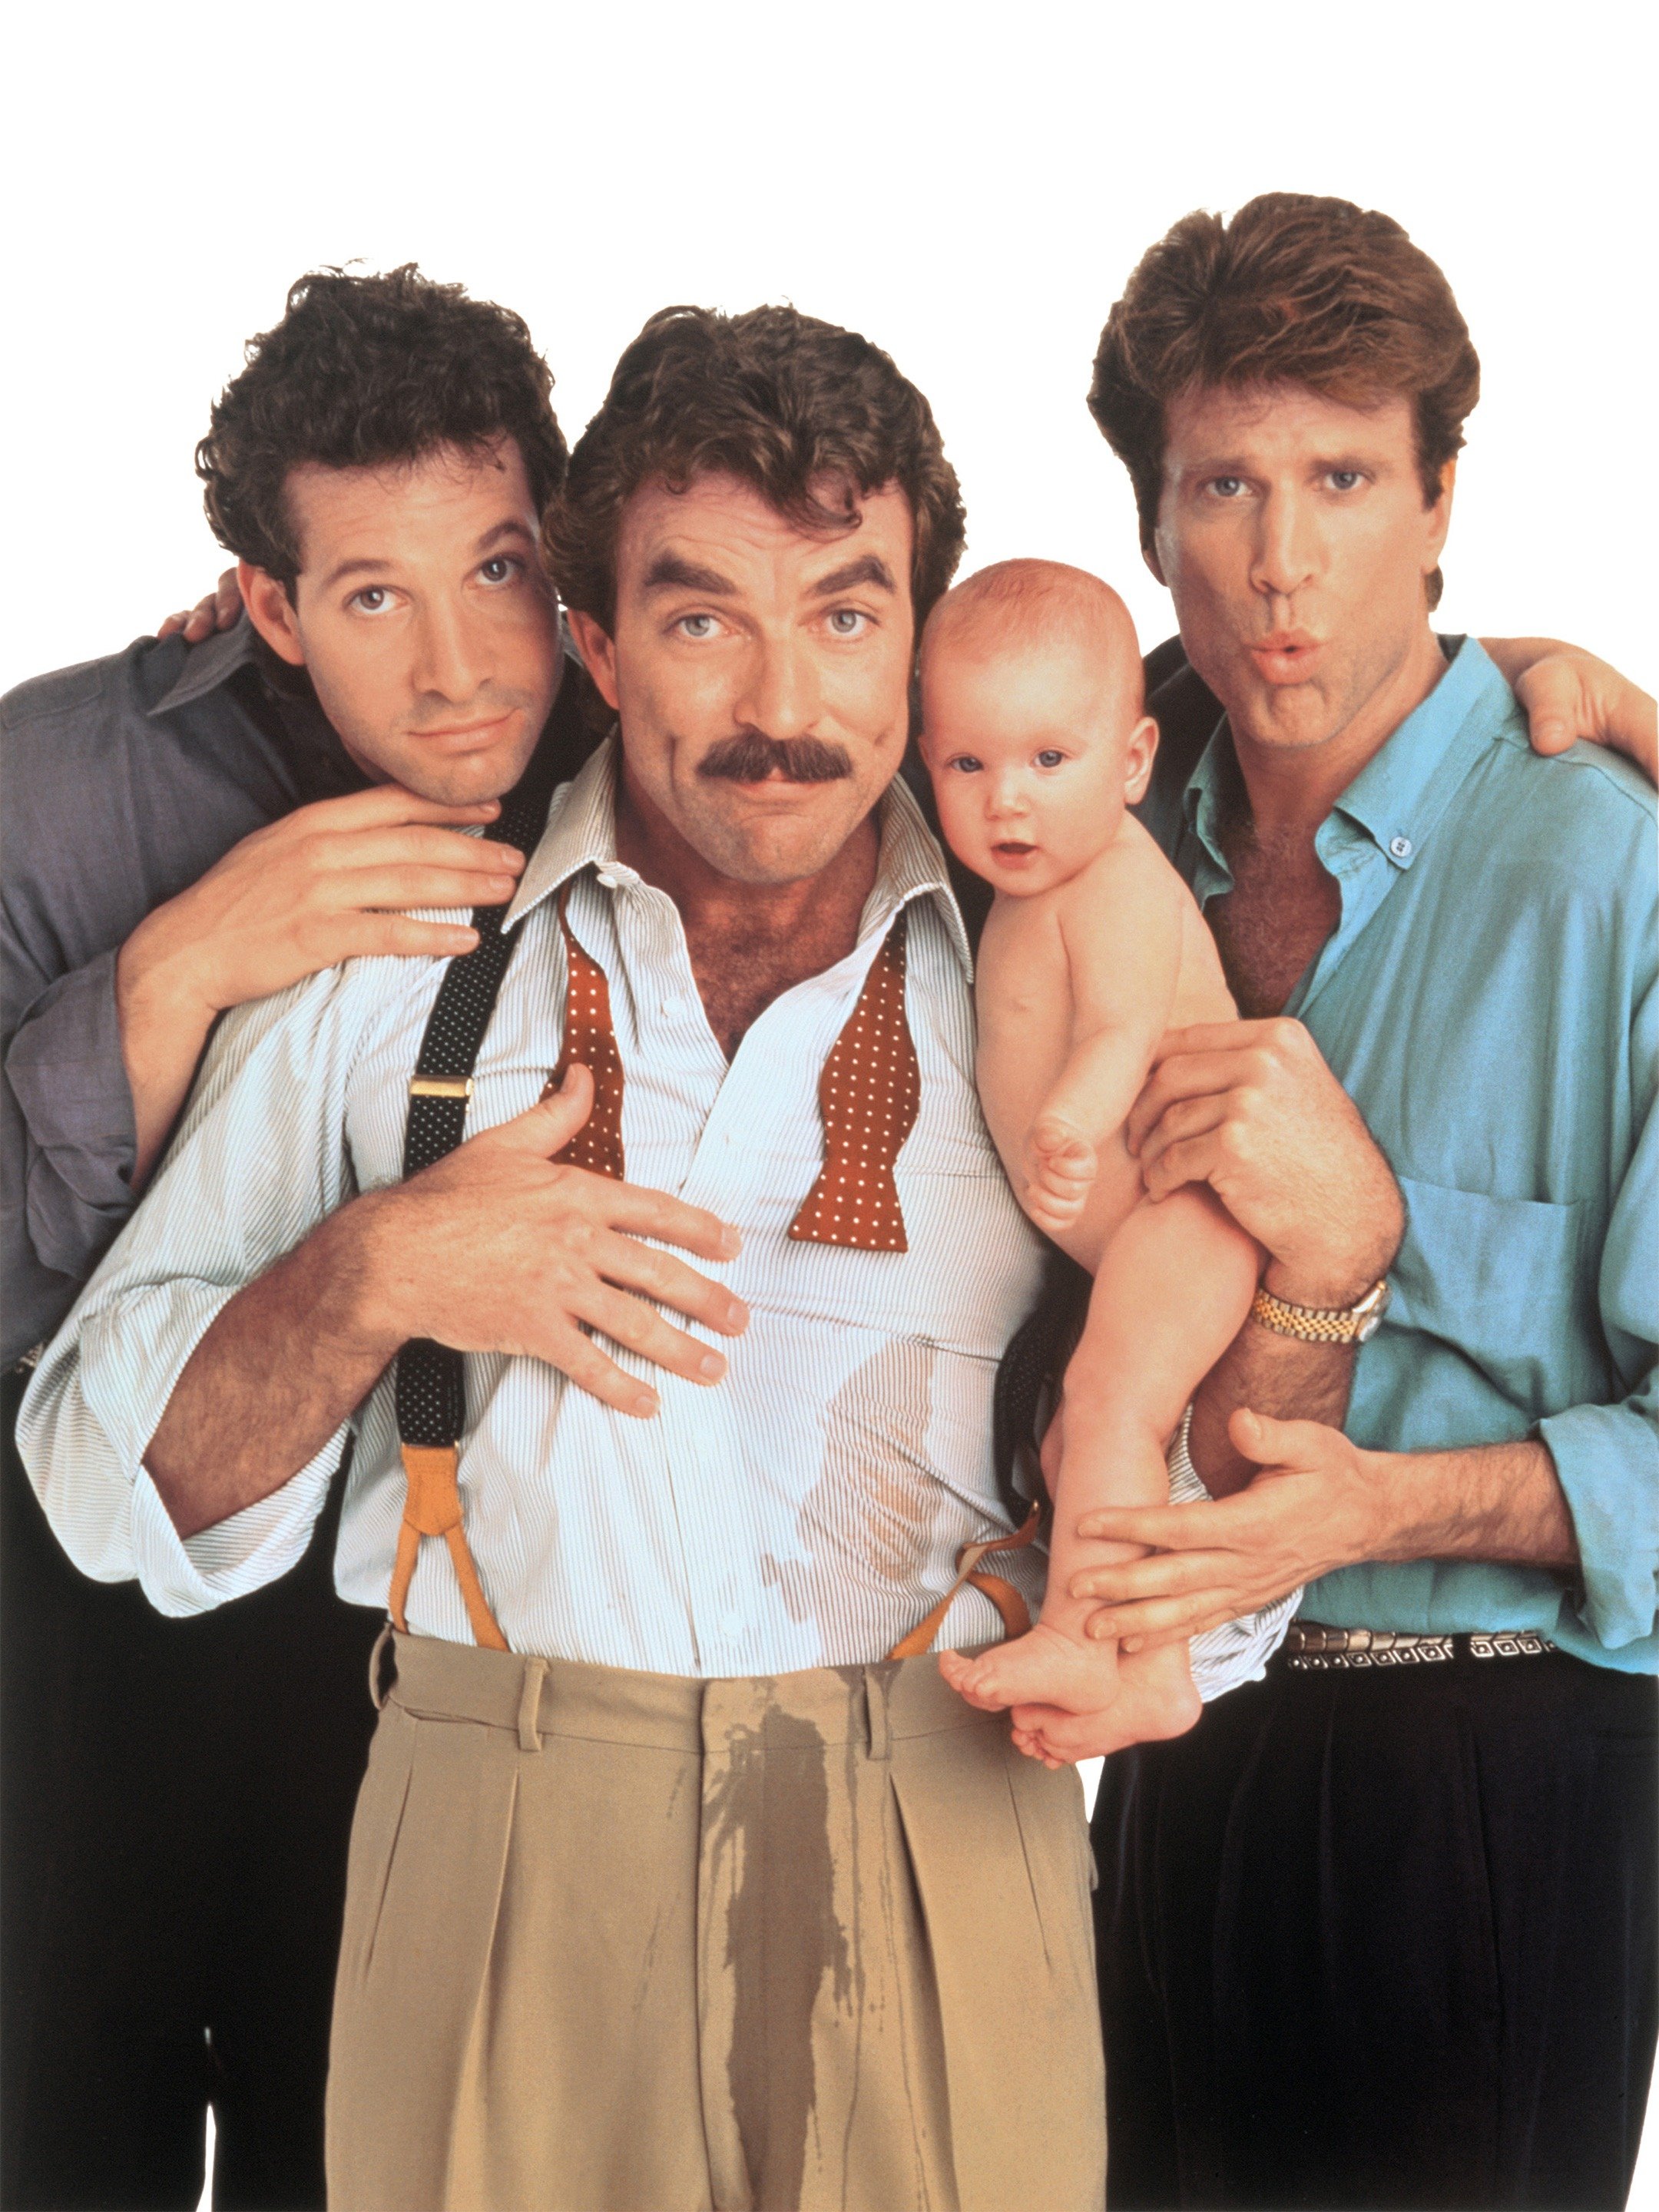 English Bulu Pikcr - Three Men and a Baby - Rotten Tomatoes